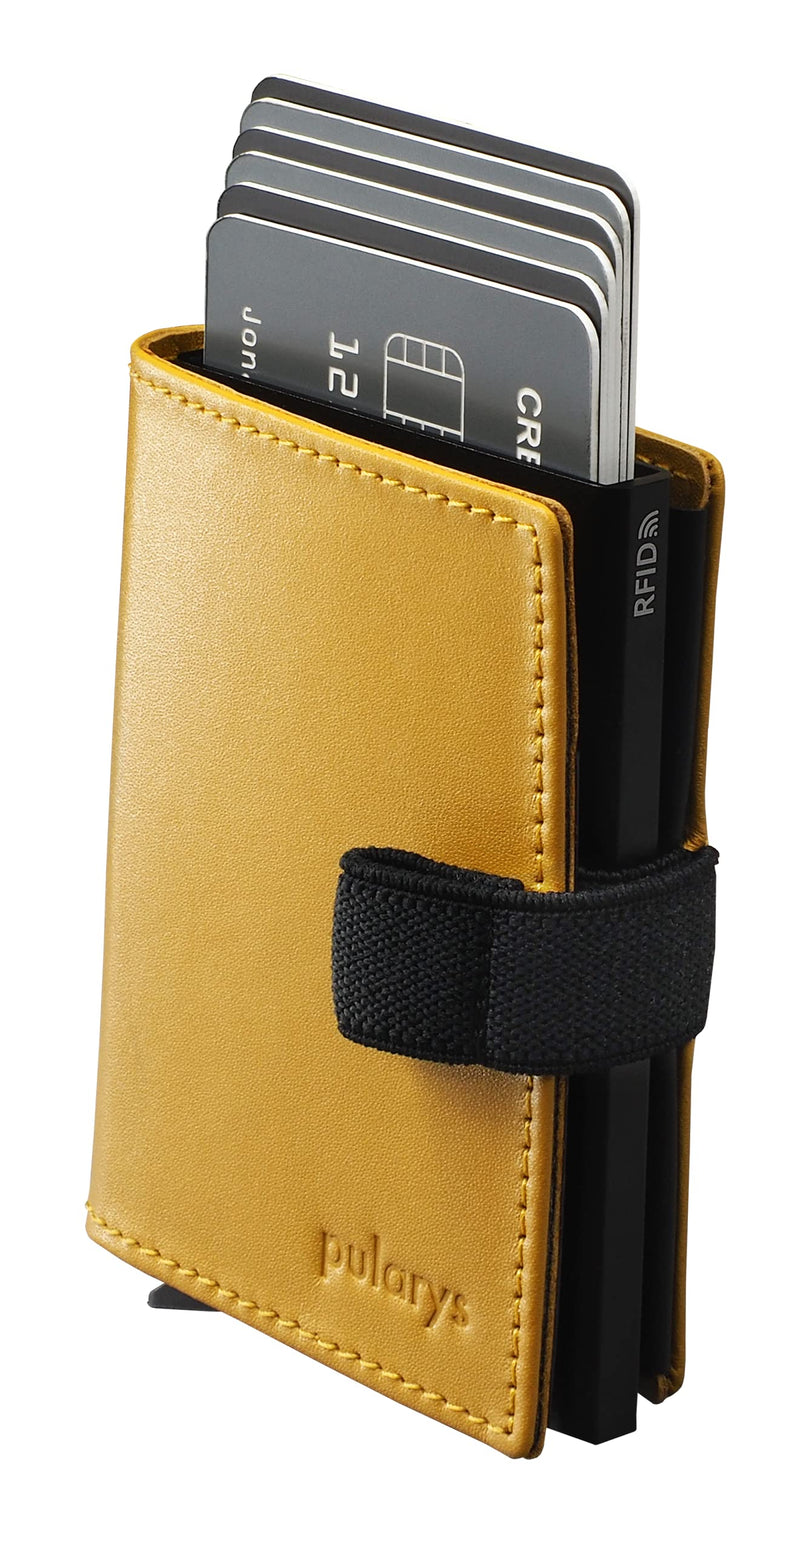 PULARYS Mini Wallet BONO - Italian Leather - SD Card Slot - Up to 8 Card Slots - Snap fastener - Pen Holder - For Men and Women - Classic Design